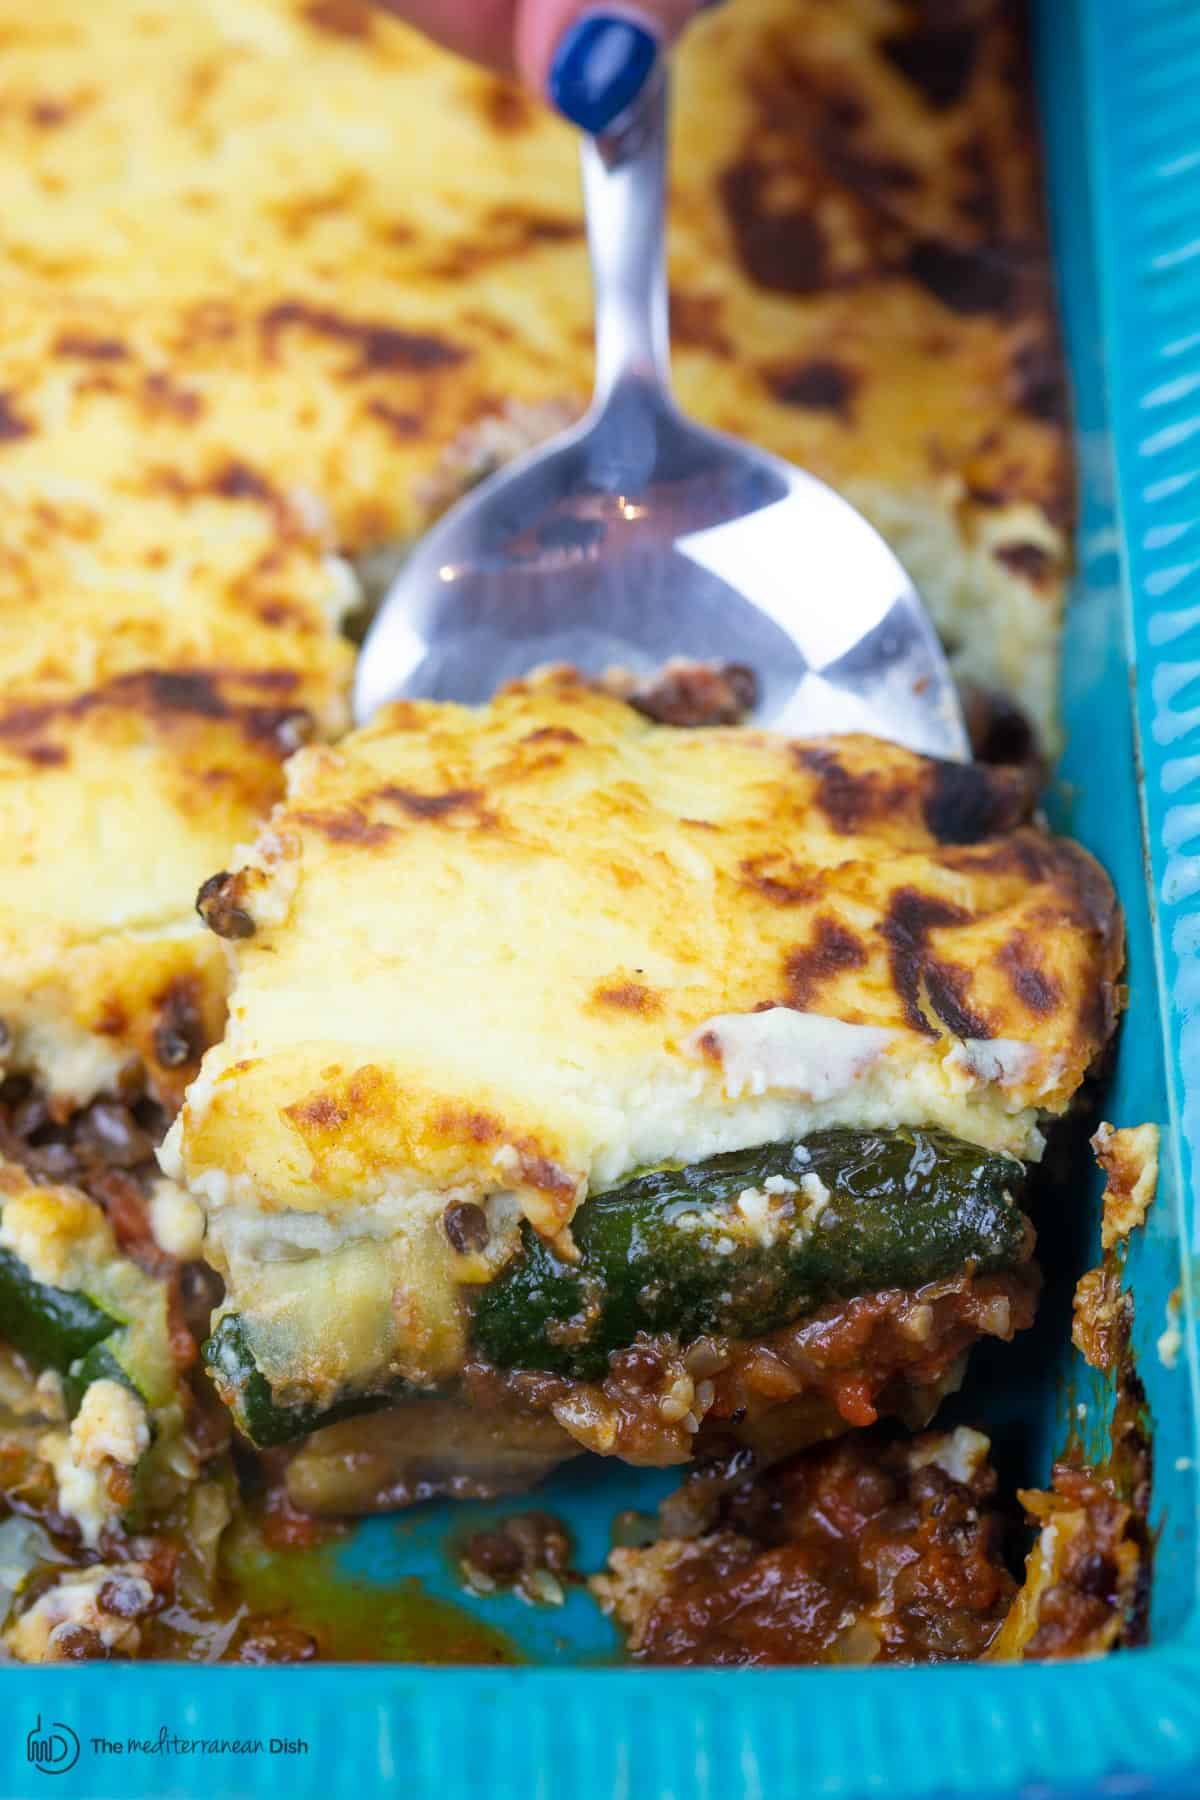 Vegetarian moussaka with eggplant, potatoes, zucchini and bechamel on top